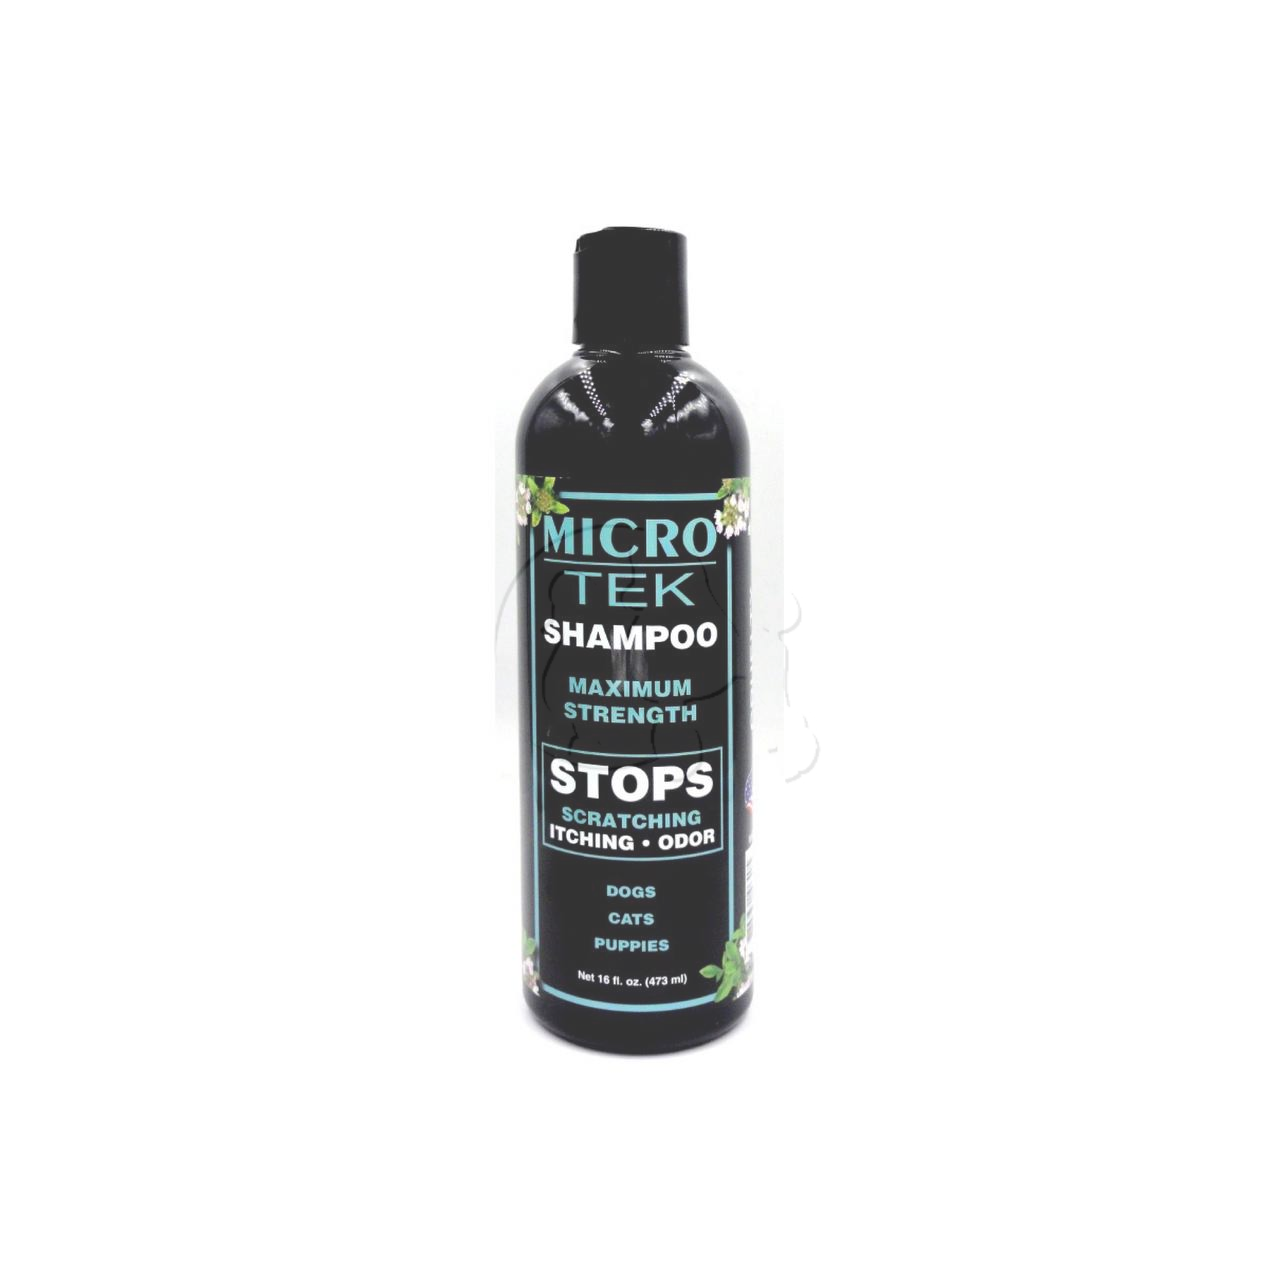 MICRO-TEK SHAMPOO (STOP ITCHING ODOR) FLORAL 473ml